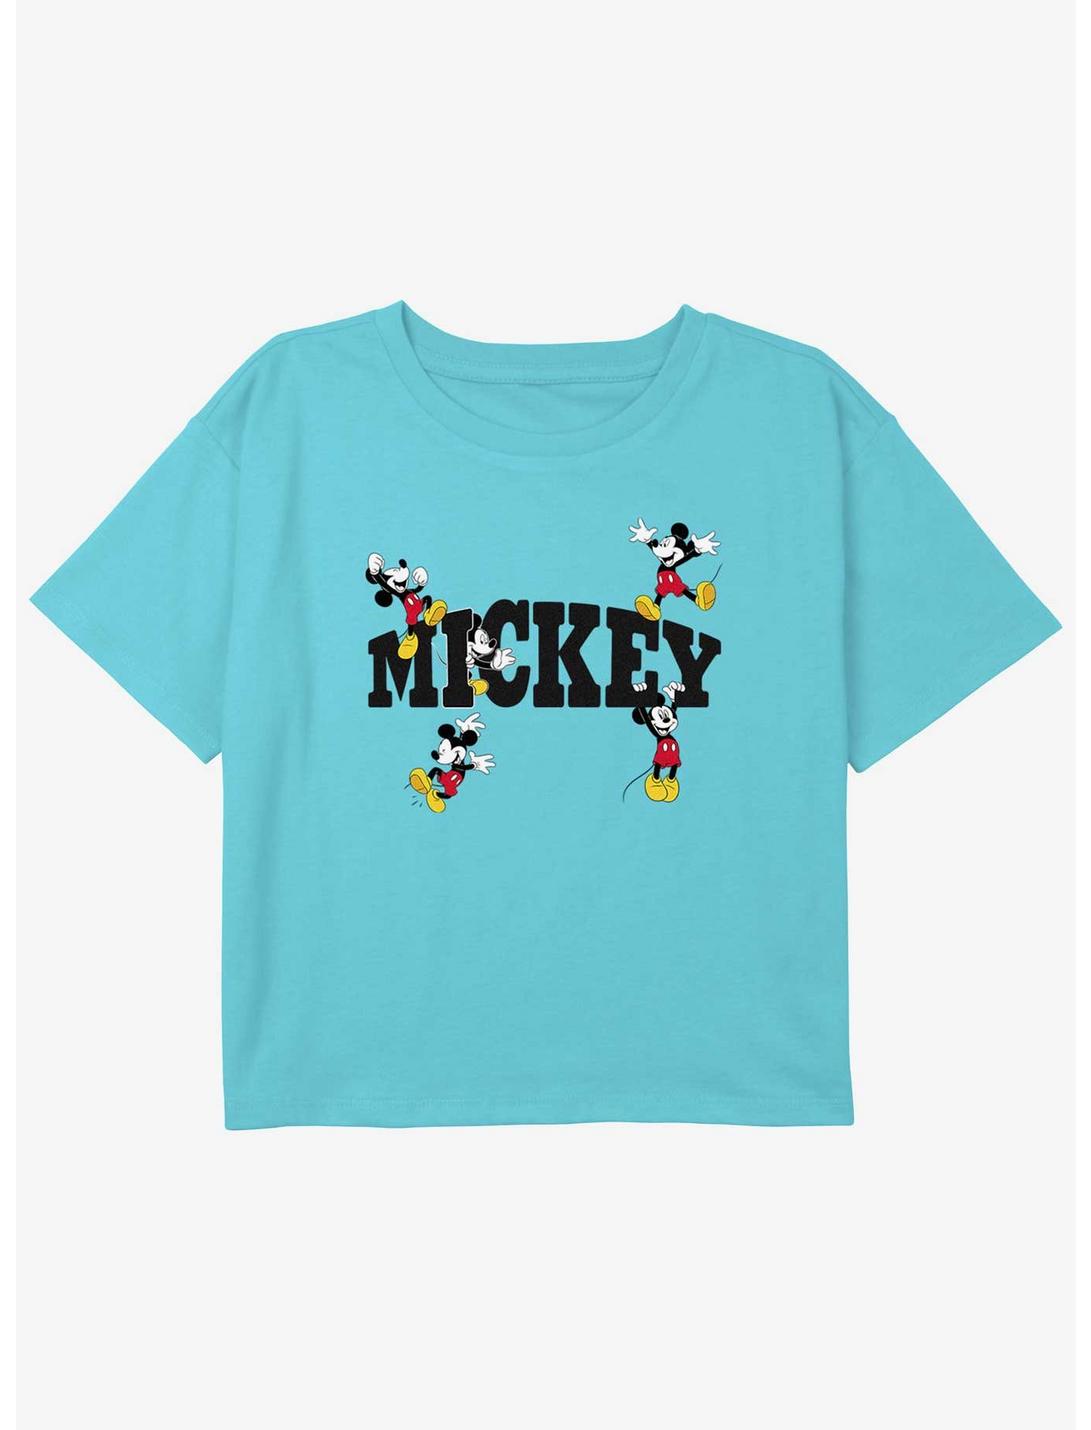 Disney Mickey Mouse Hanging Around Girls Youth Crop T-Shirt, BLUE, hi-res